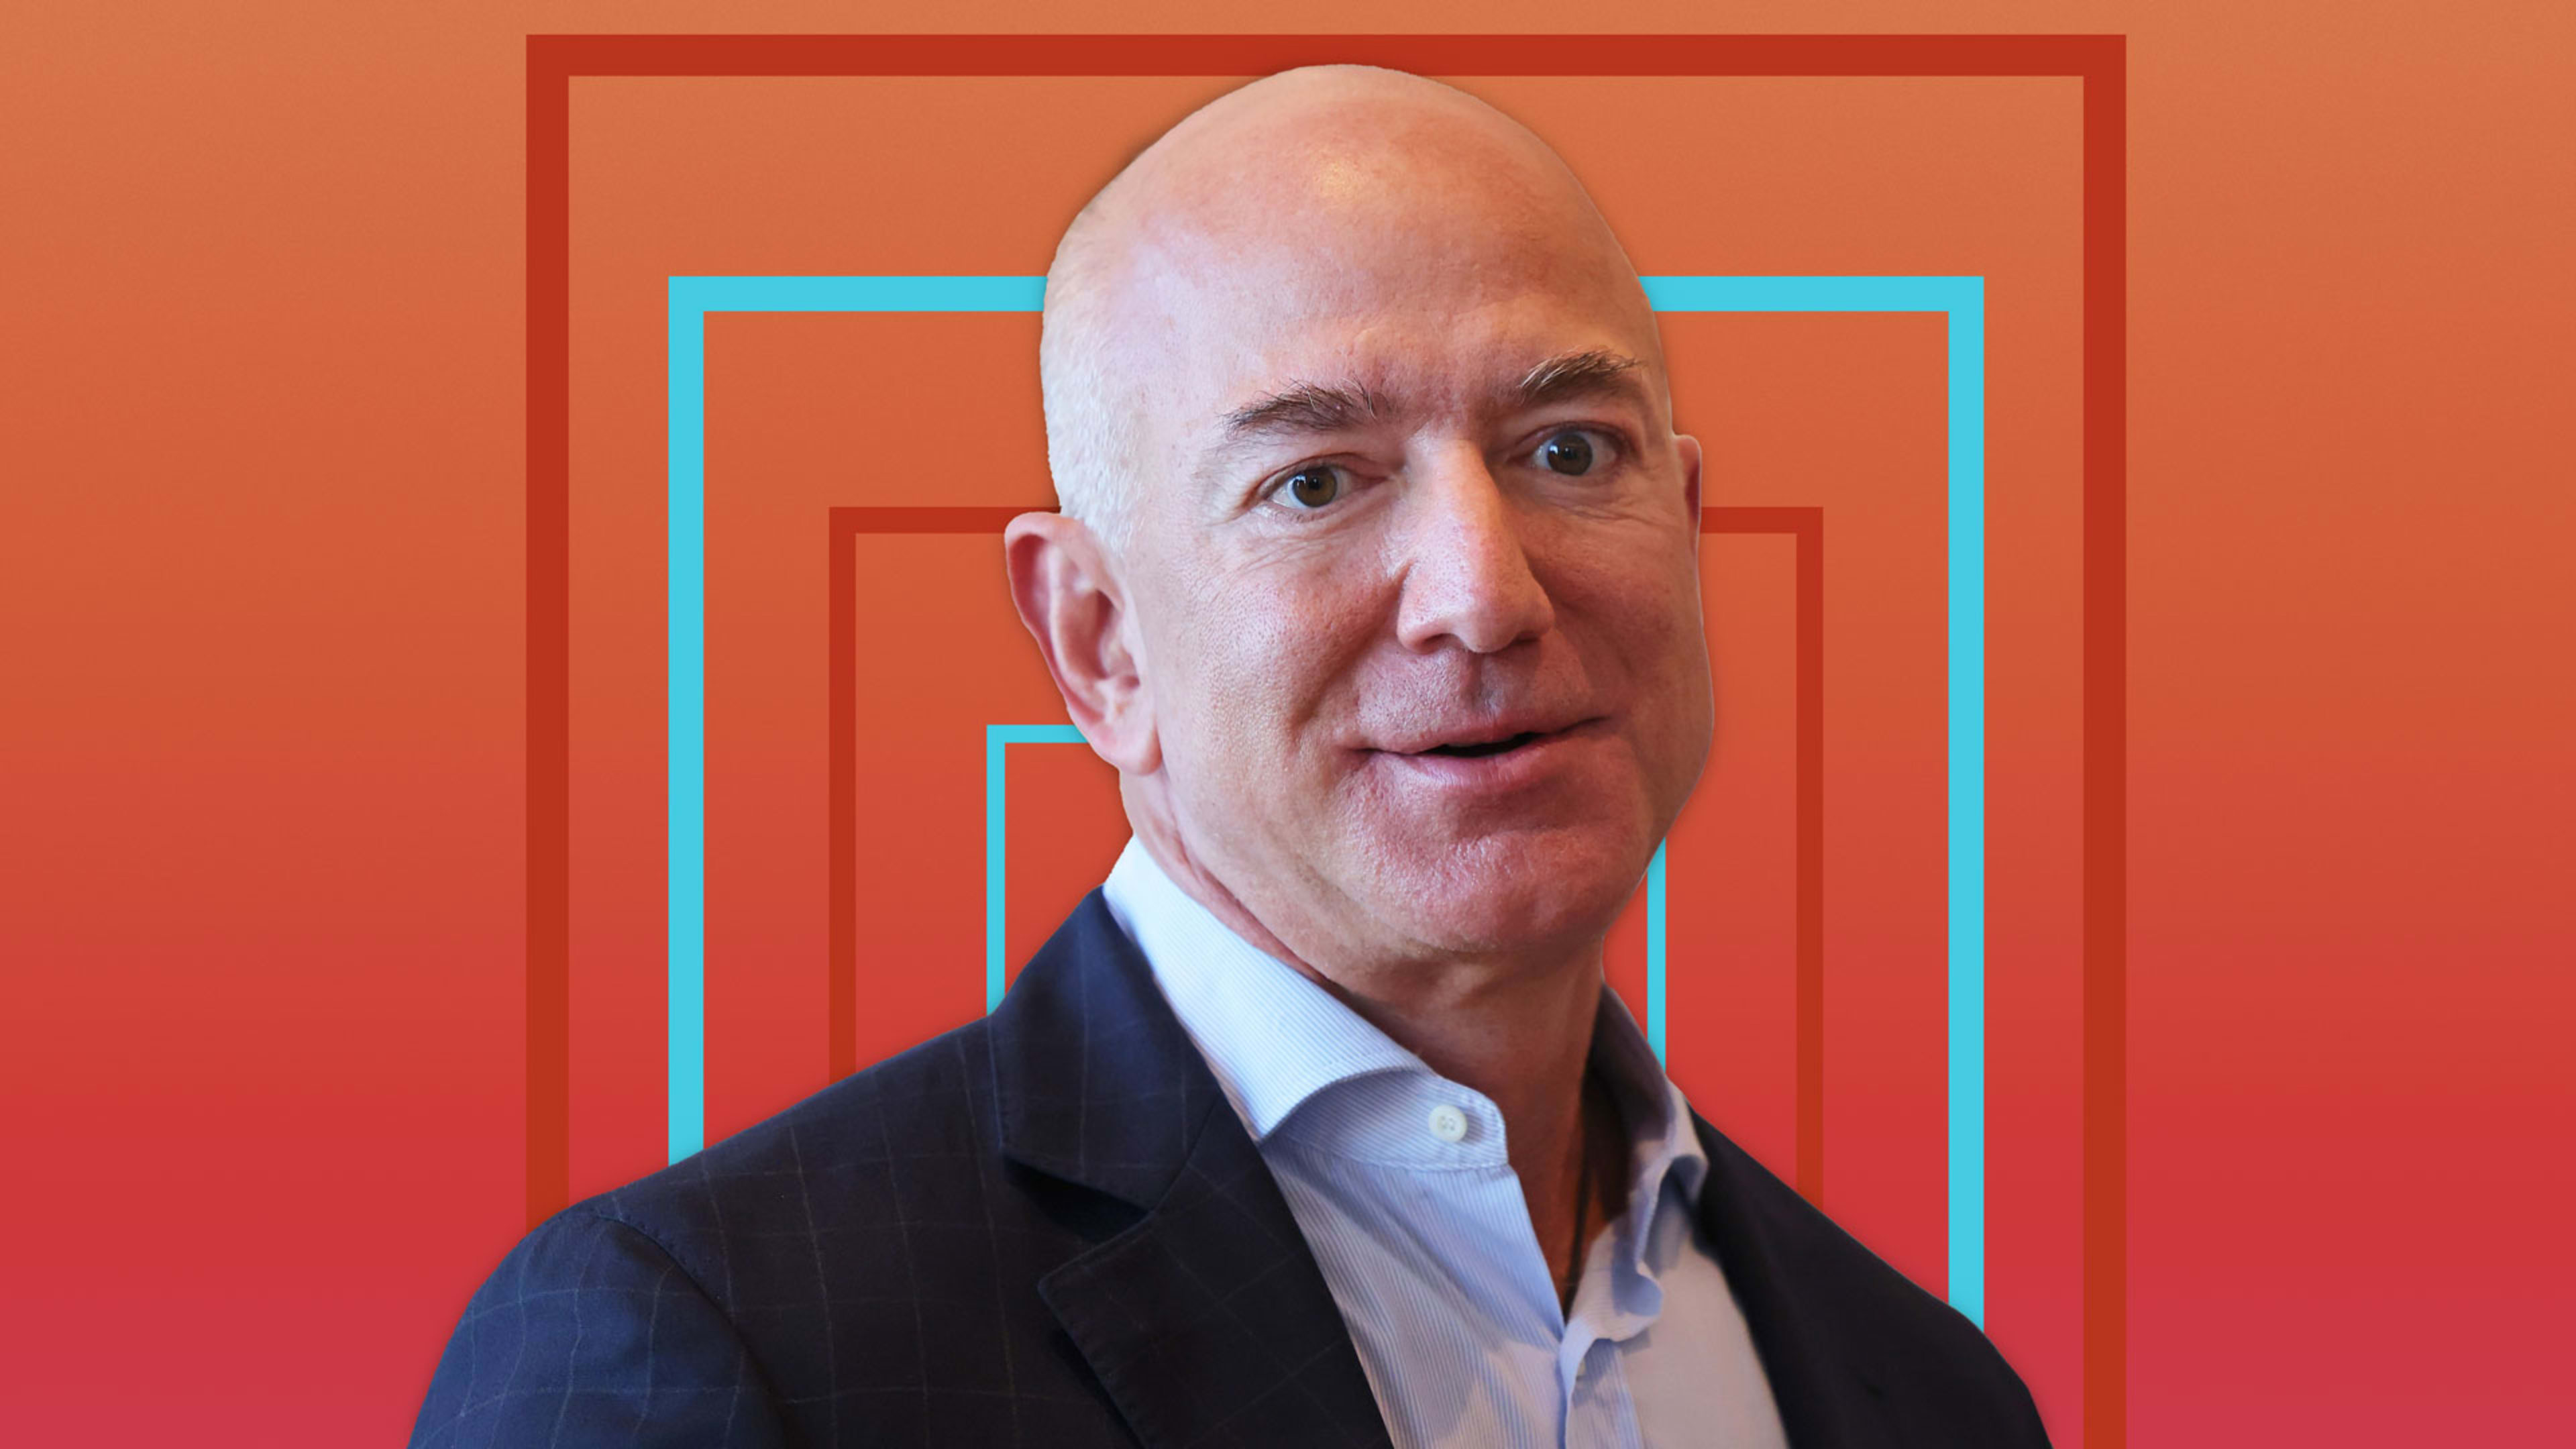 What I’ve learned from watching Jeff Bezos make decisions up close